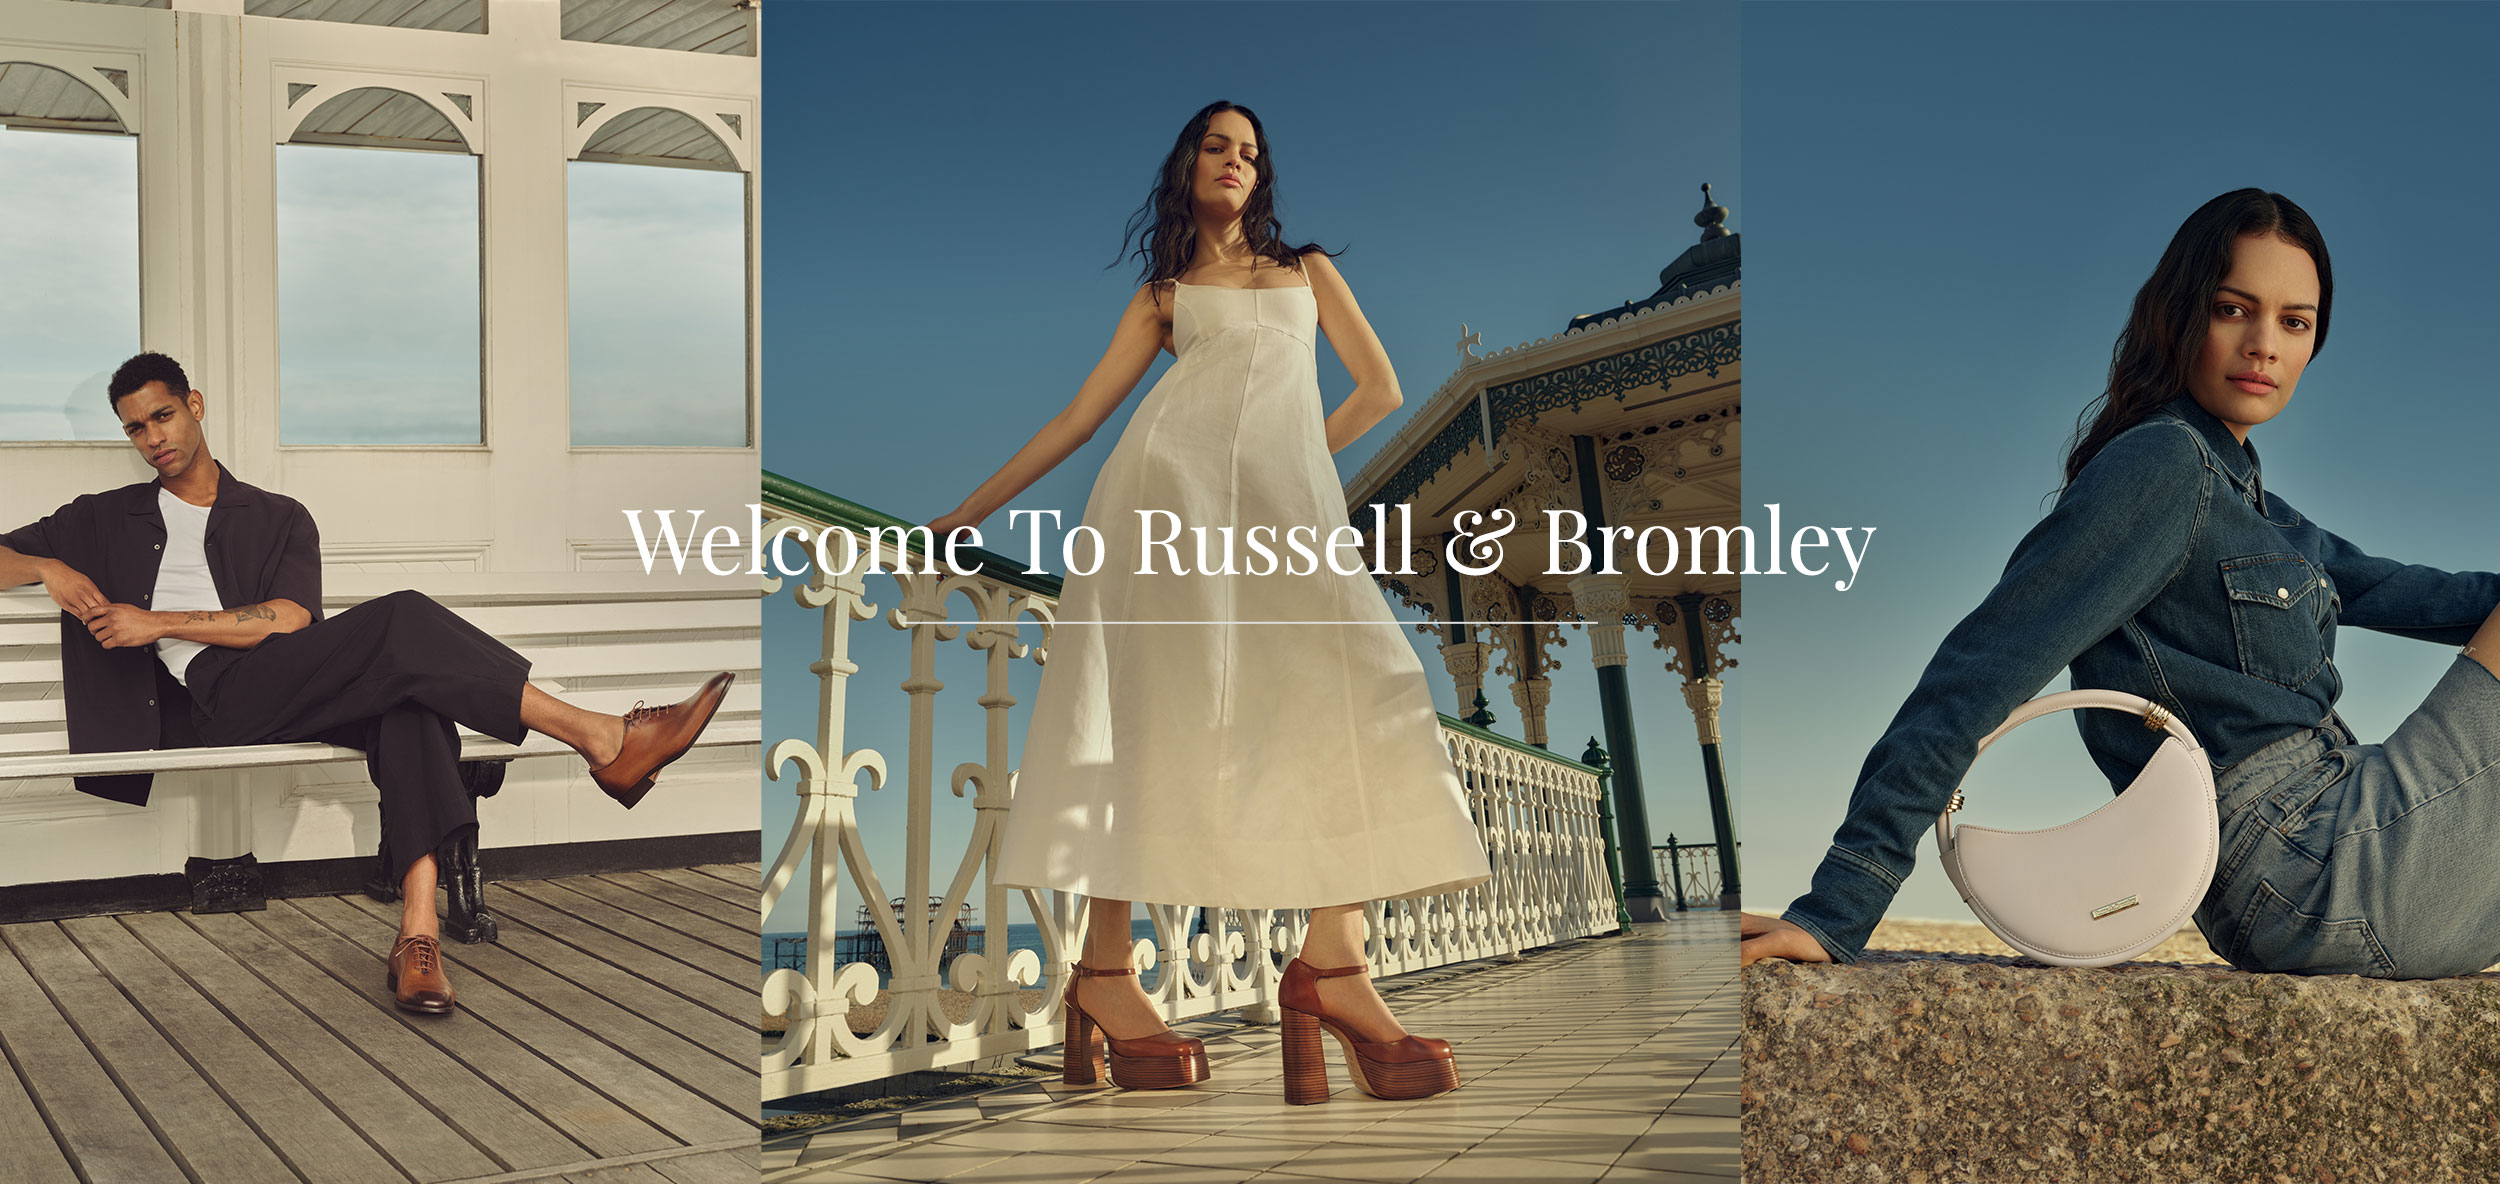 Welcome to Russell & Bromley